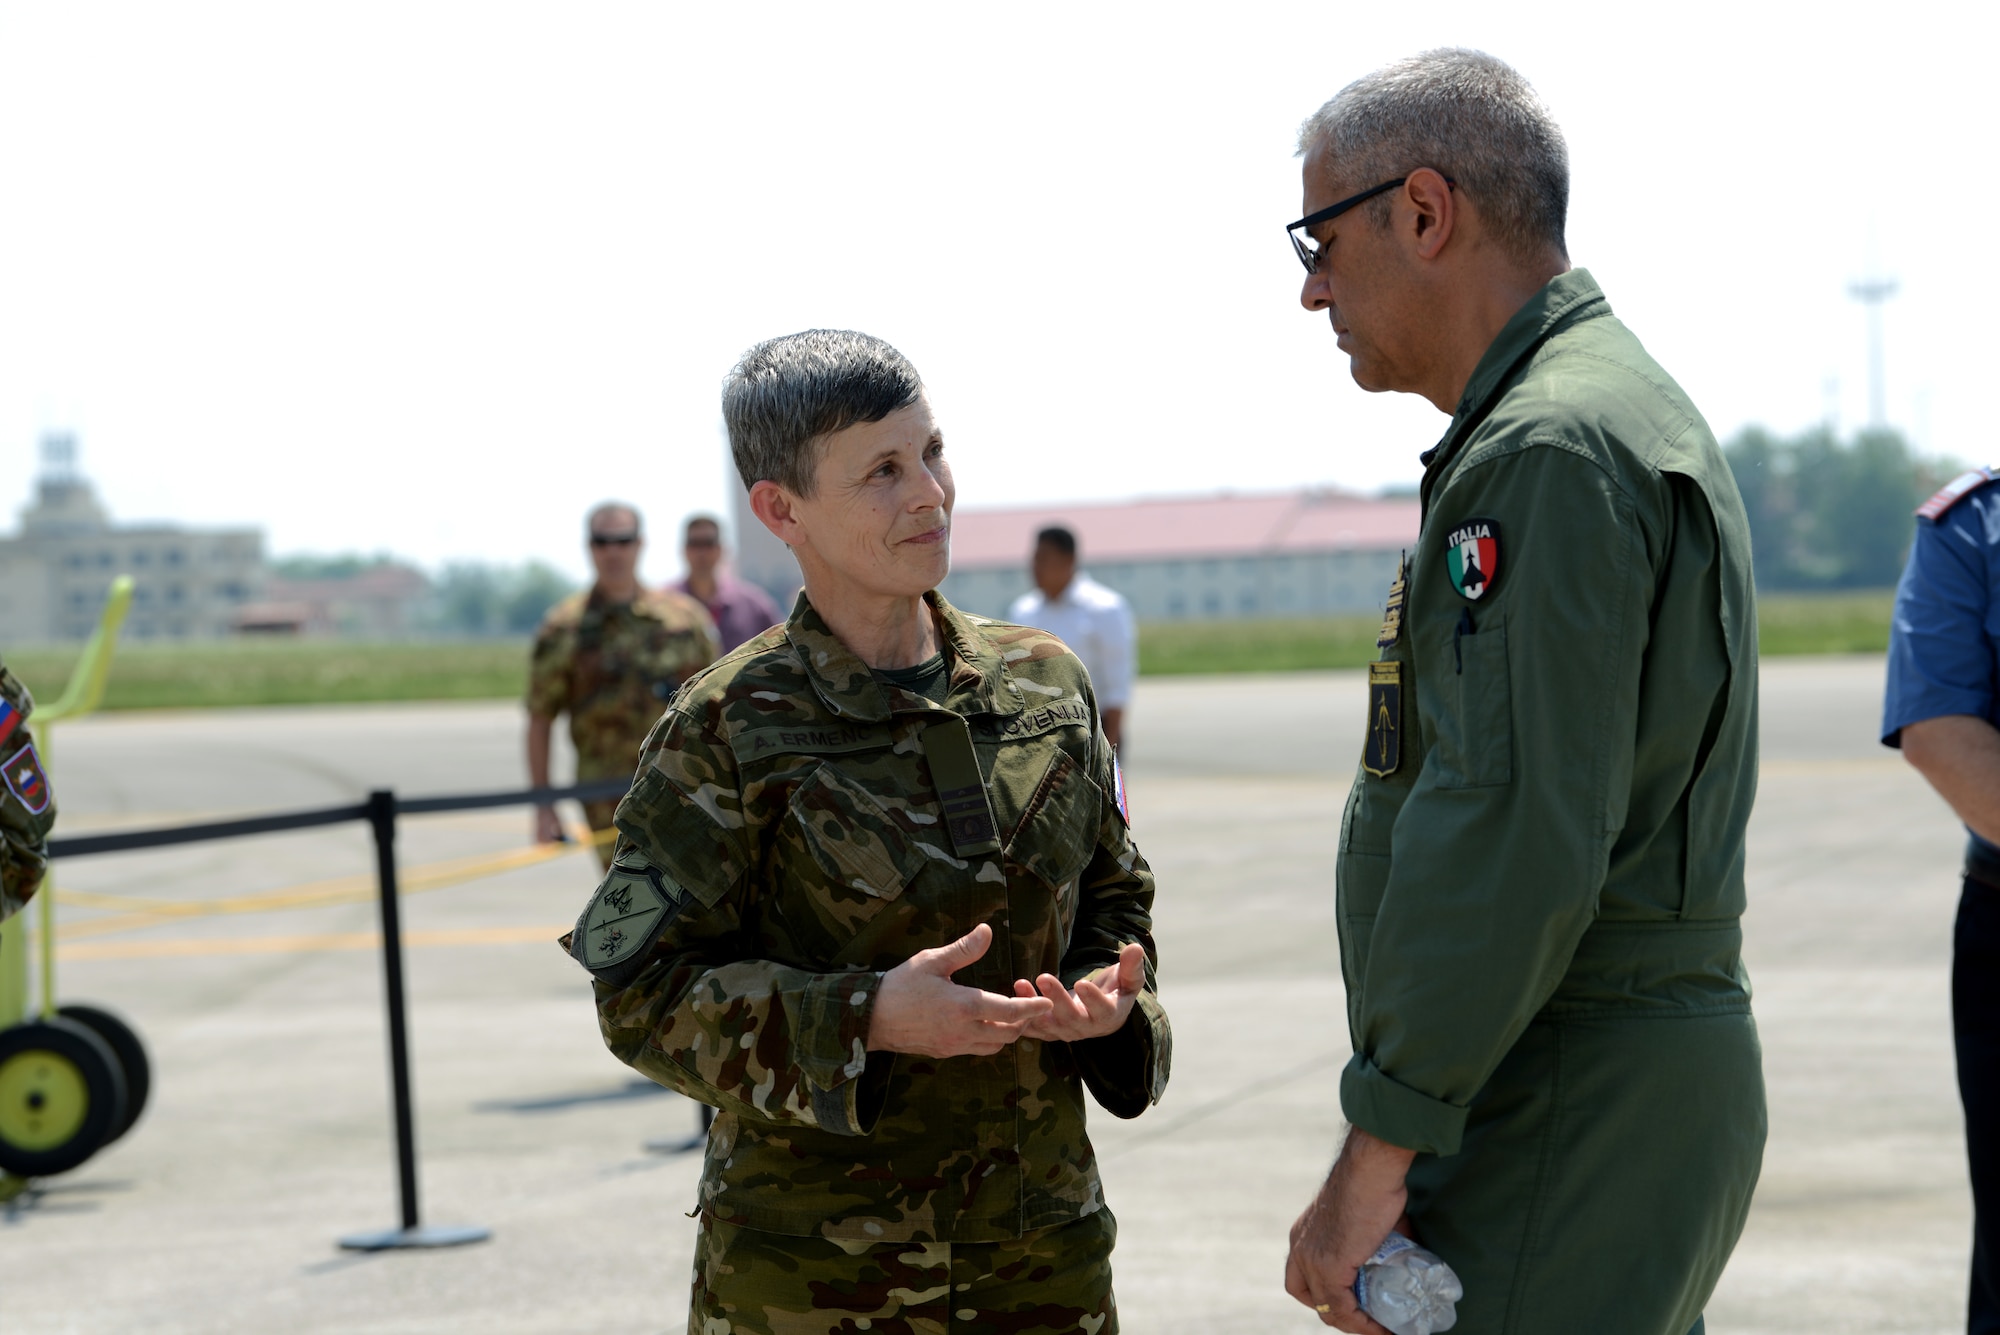 Senior Leaders, Italian Air Force Maj. Gen. Silvano Frigerio, Combat Force Command commander, and Gen. Alenka Ermenc, Slovenia Air Force chief of the general staff, visited Aviano Air Base, Italy as part of Astral Knight 2019, June 4. The Senior Leaders visited Aviano as part of the first U.S. Air Forces in Europe-sponsored integrated air and missile defense exercise taking place at various locations in Italy, Croatia and Slovenia. (U.S. Air Force photo by Airman 1st Class Ericka A. Dechane).